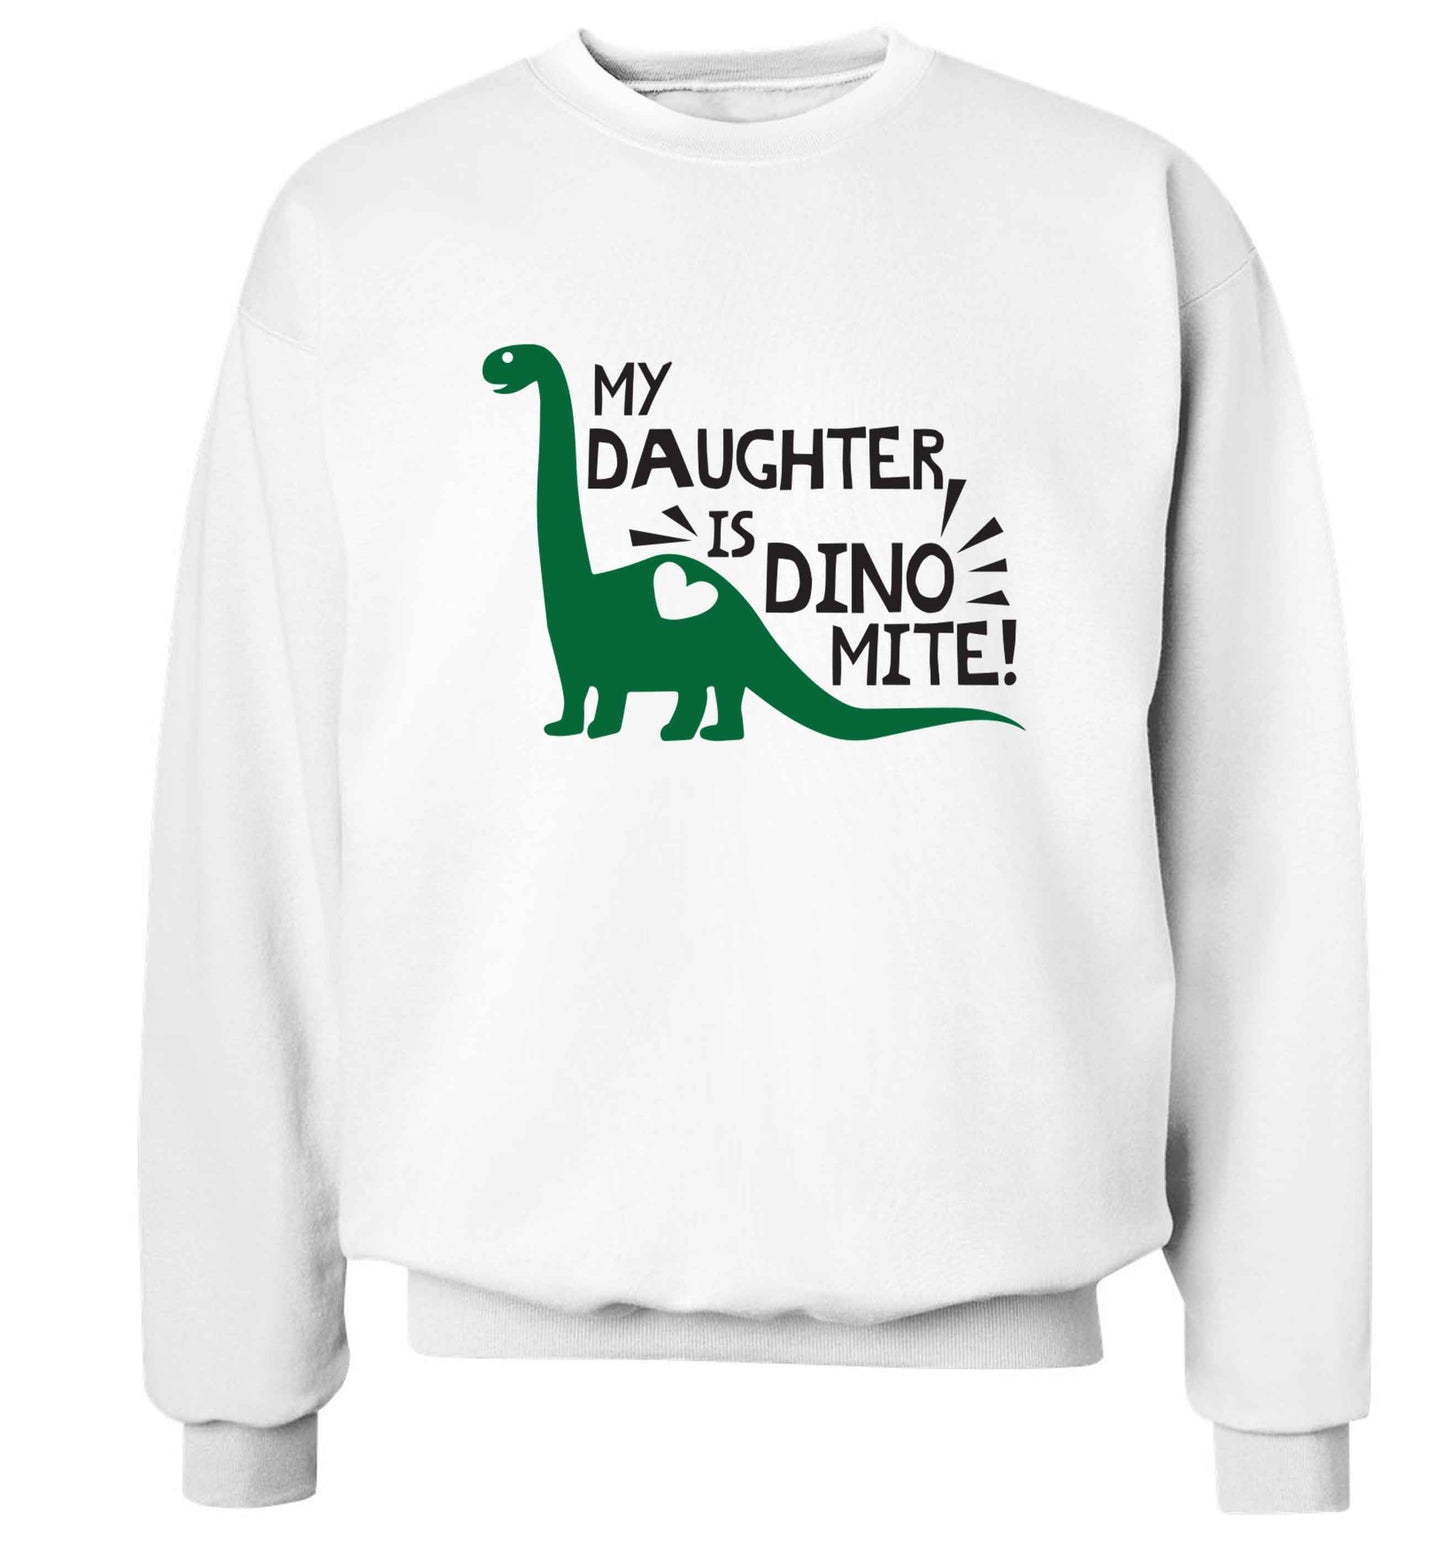 My daughter is dinomite! Adult's unisex white Sweater 2XL